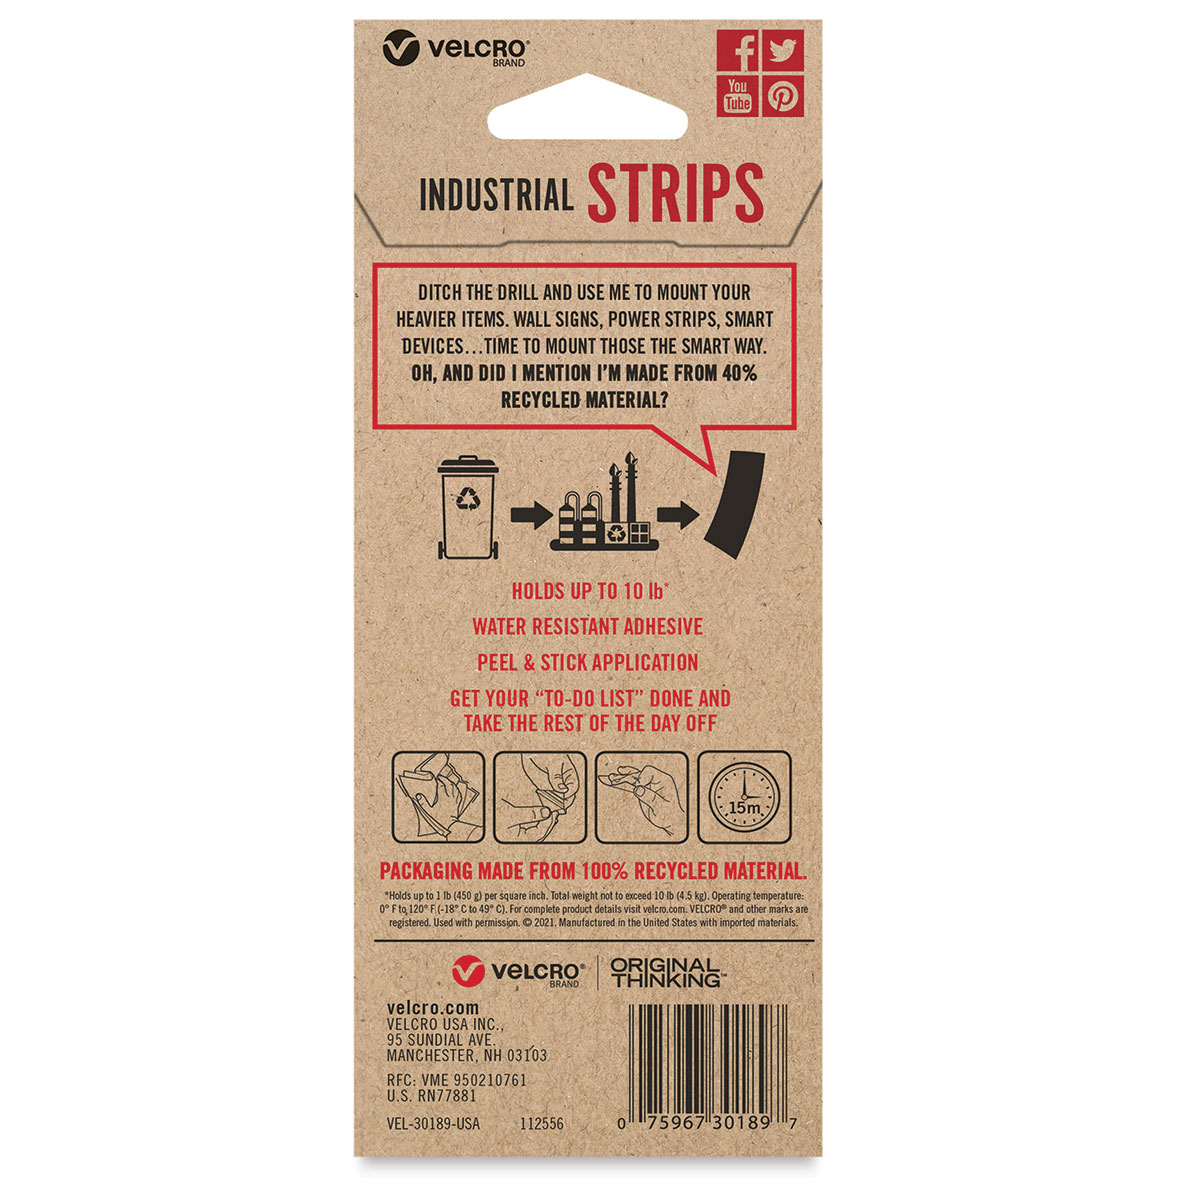 Velcro Brand ECO Collection Industrial Strips, Pkg of 2, Black, 3 x 1-3/4